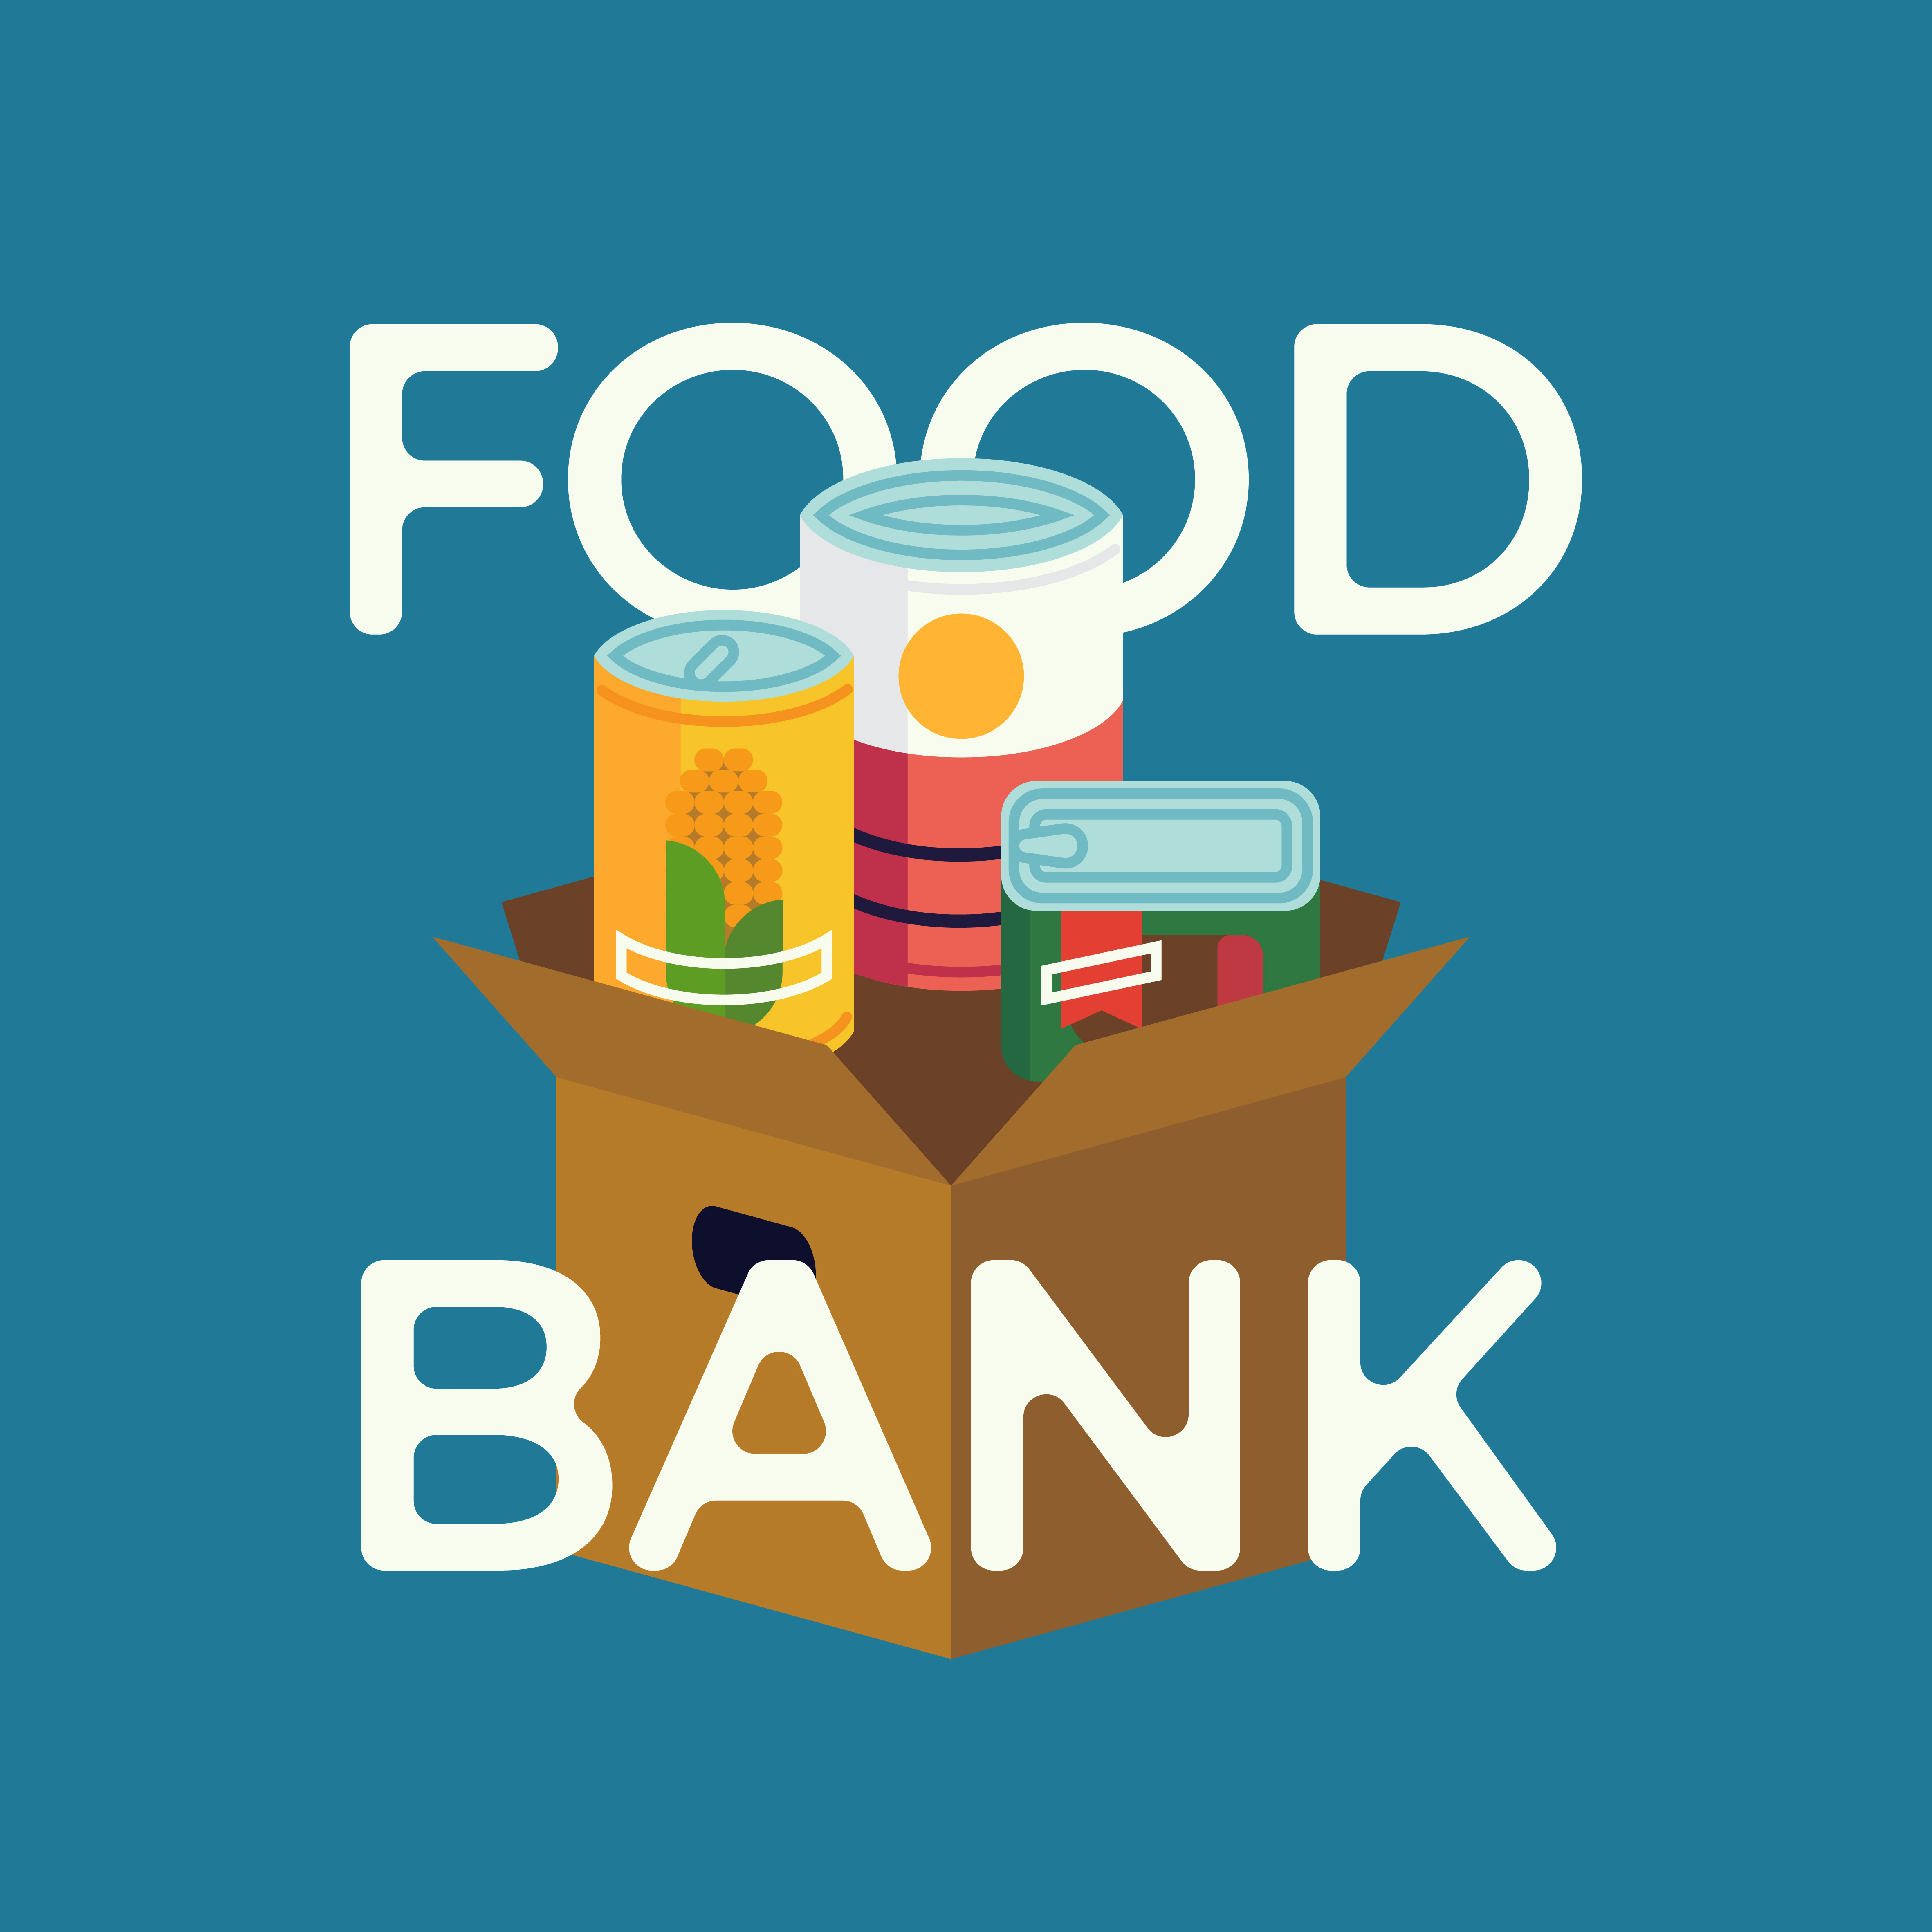 donate to the food bank to help